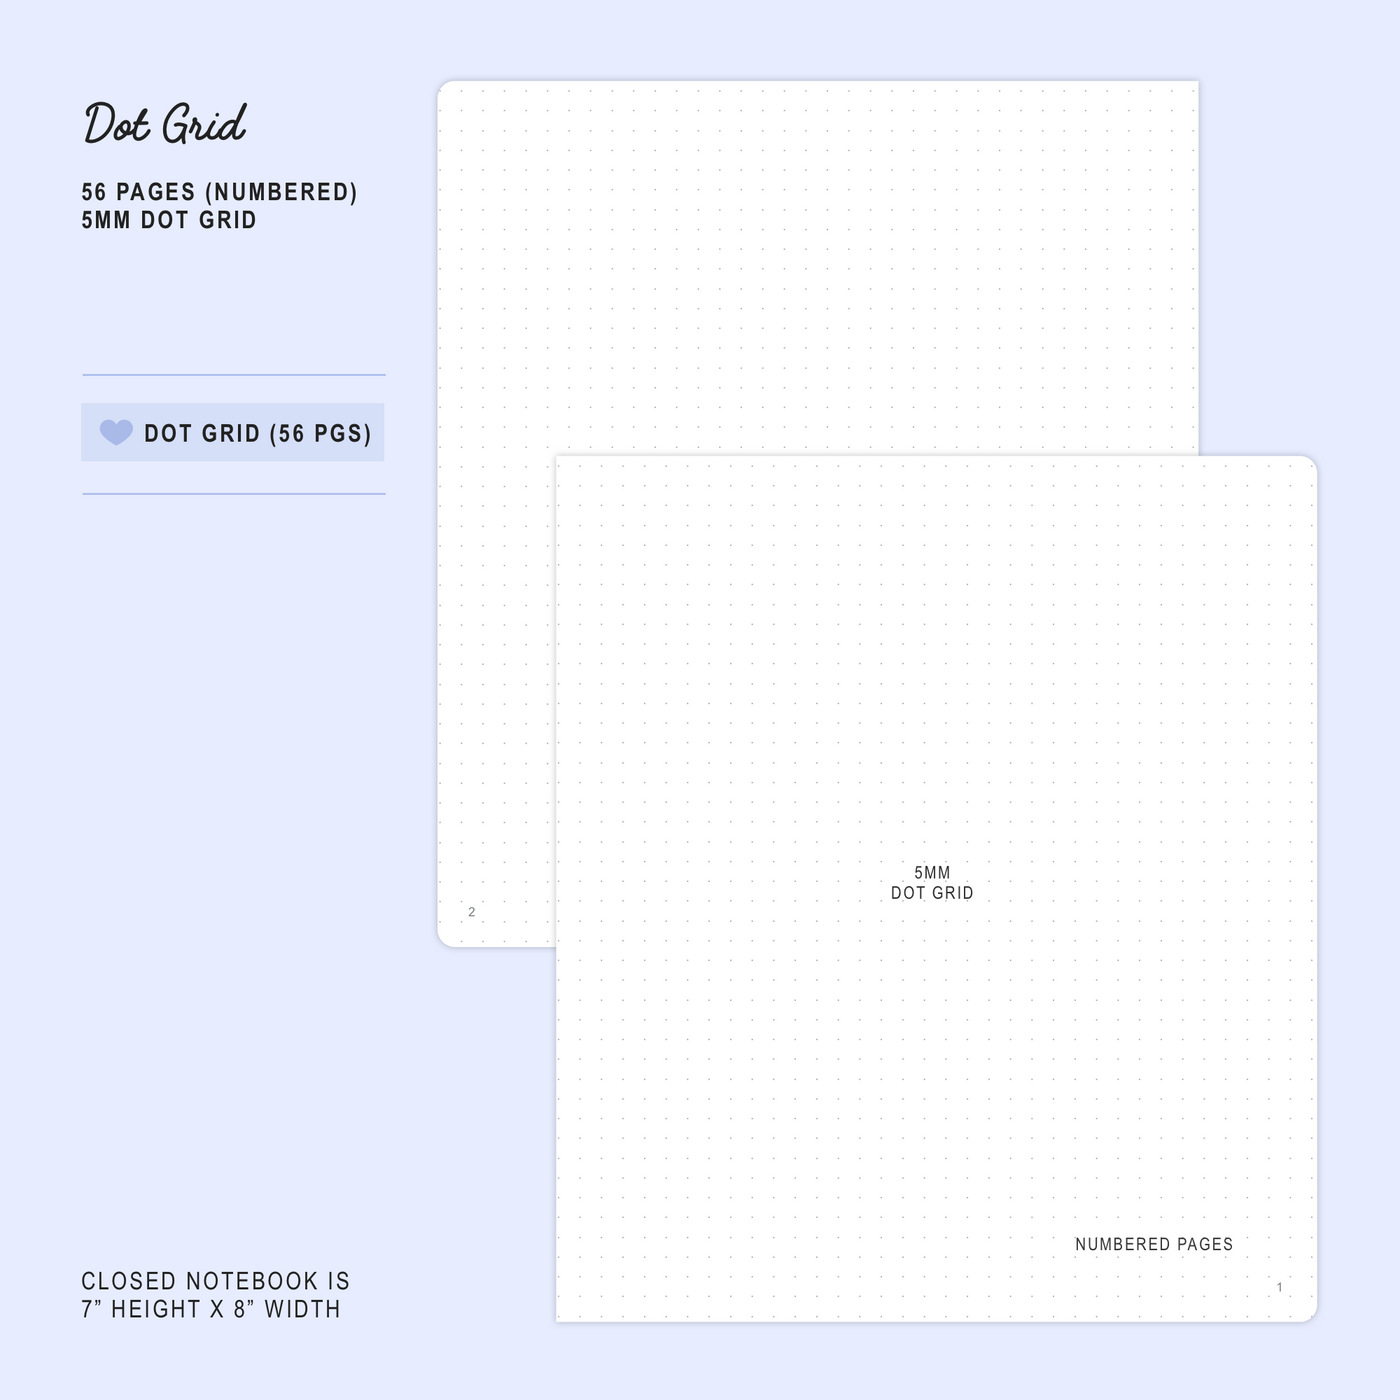 N097 | Pajama Party - Dot Grid Notebook (A5W)